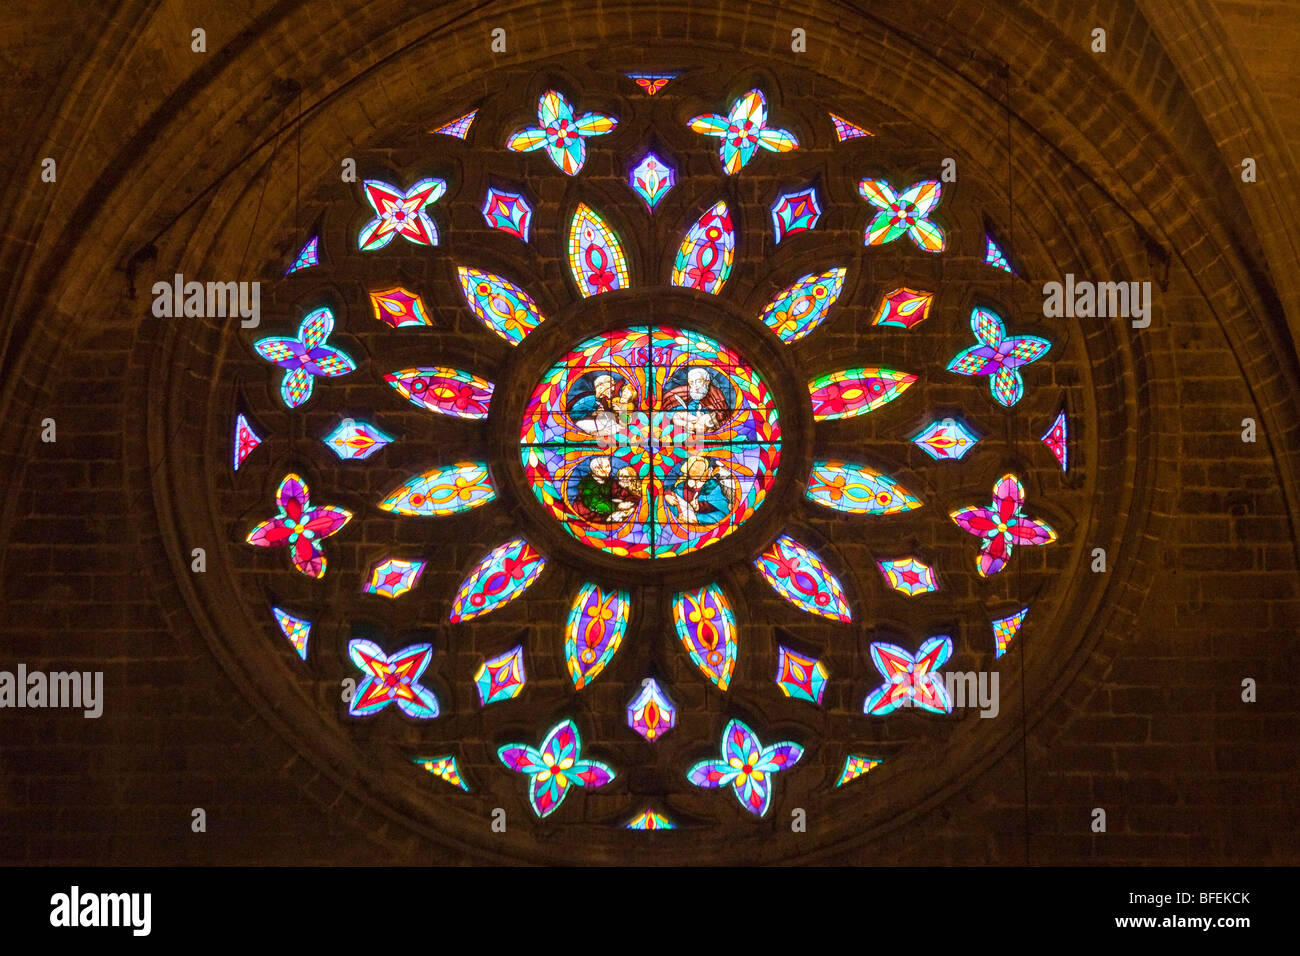 Stained Glass Window at the Cathedral of Seville in Spain Stock Photo